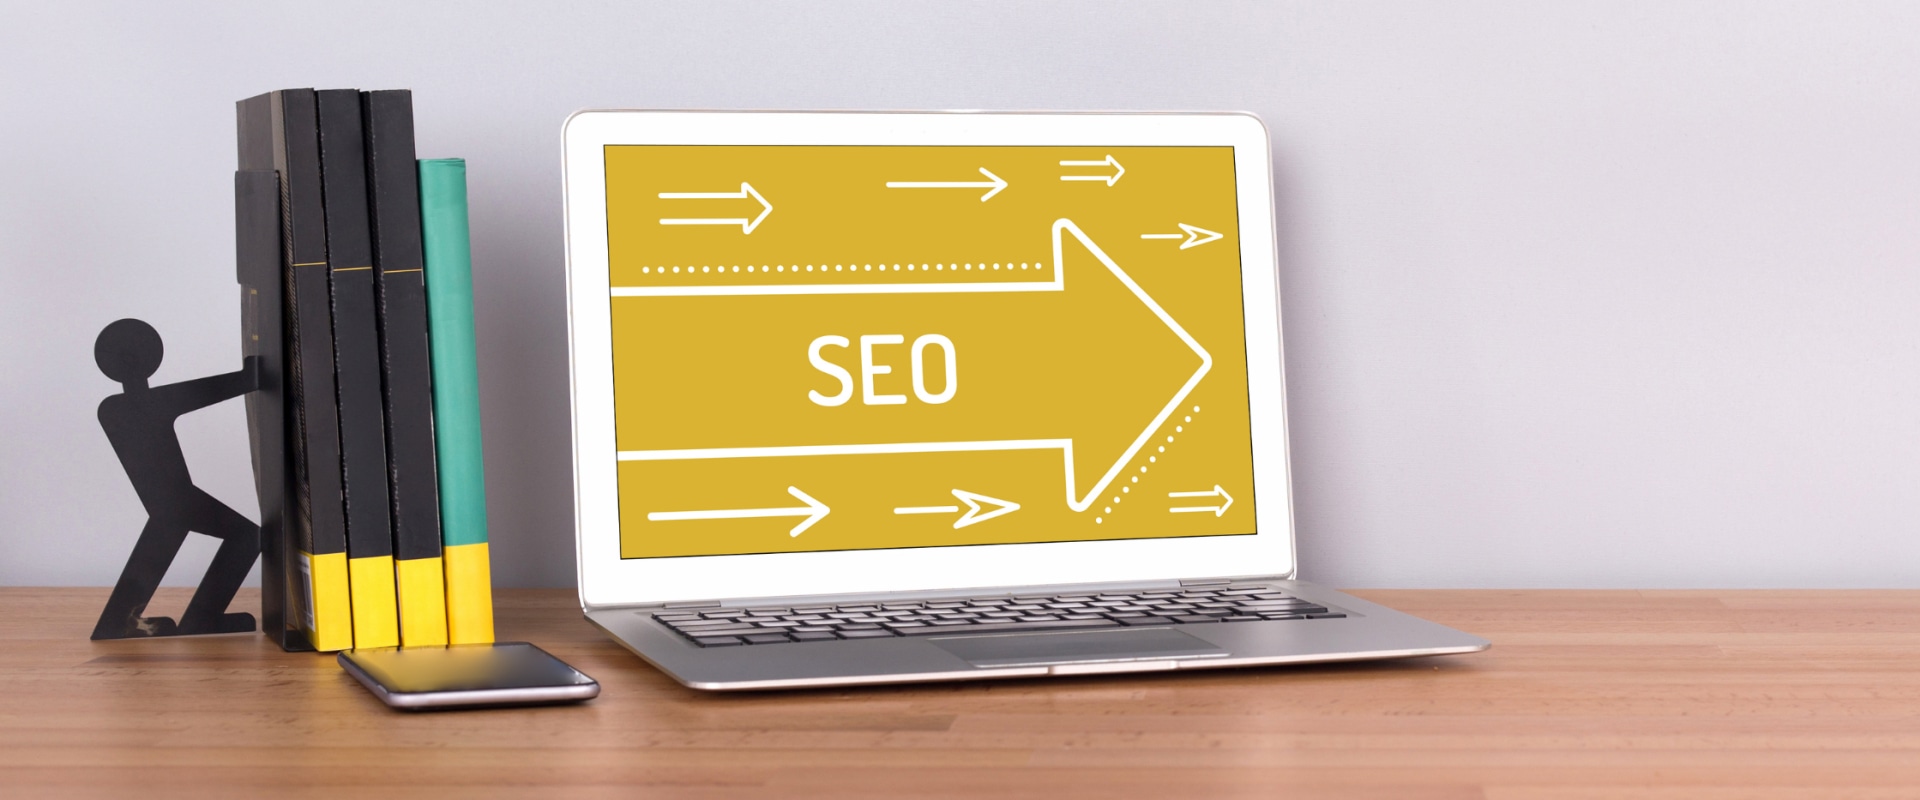 What are some tips for getting the most out of working with an ecommerce seo consultant?